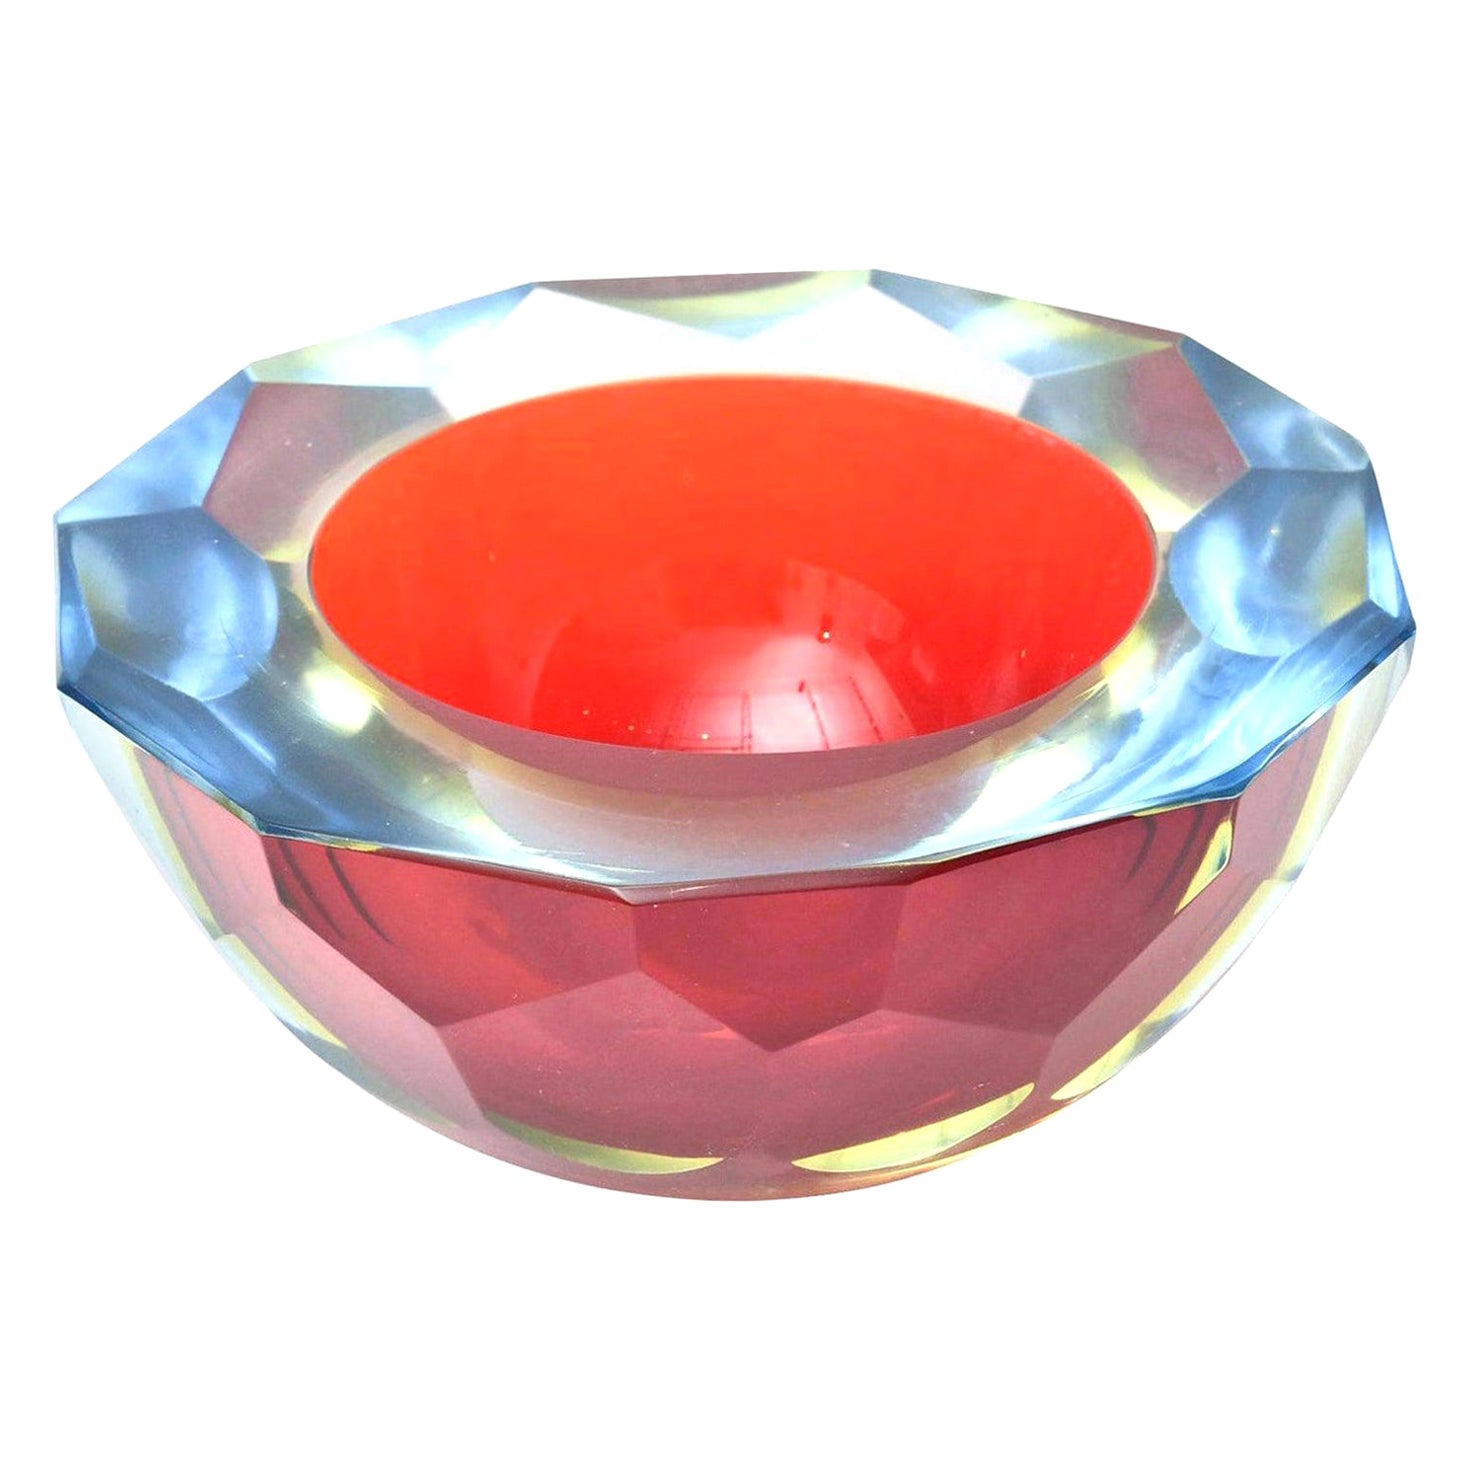 Murano Mandruzzato Red, Blue Sommerso Diamond Faceted Geode Glass Bowl Vintage